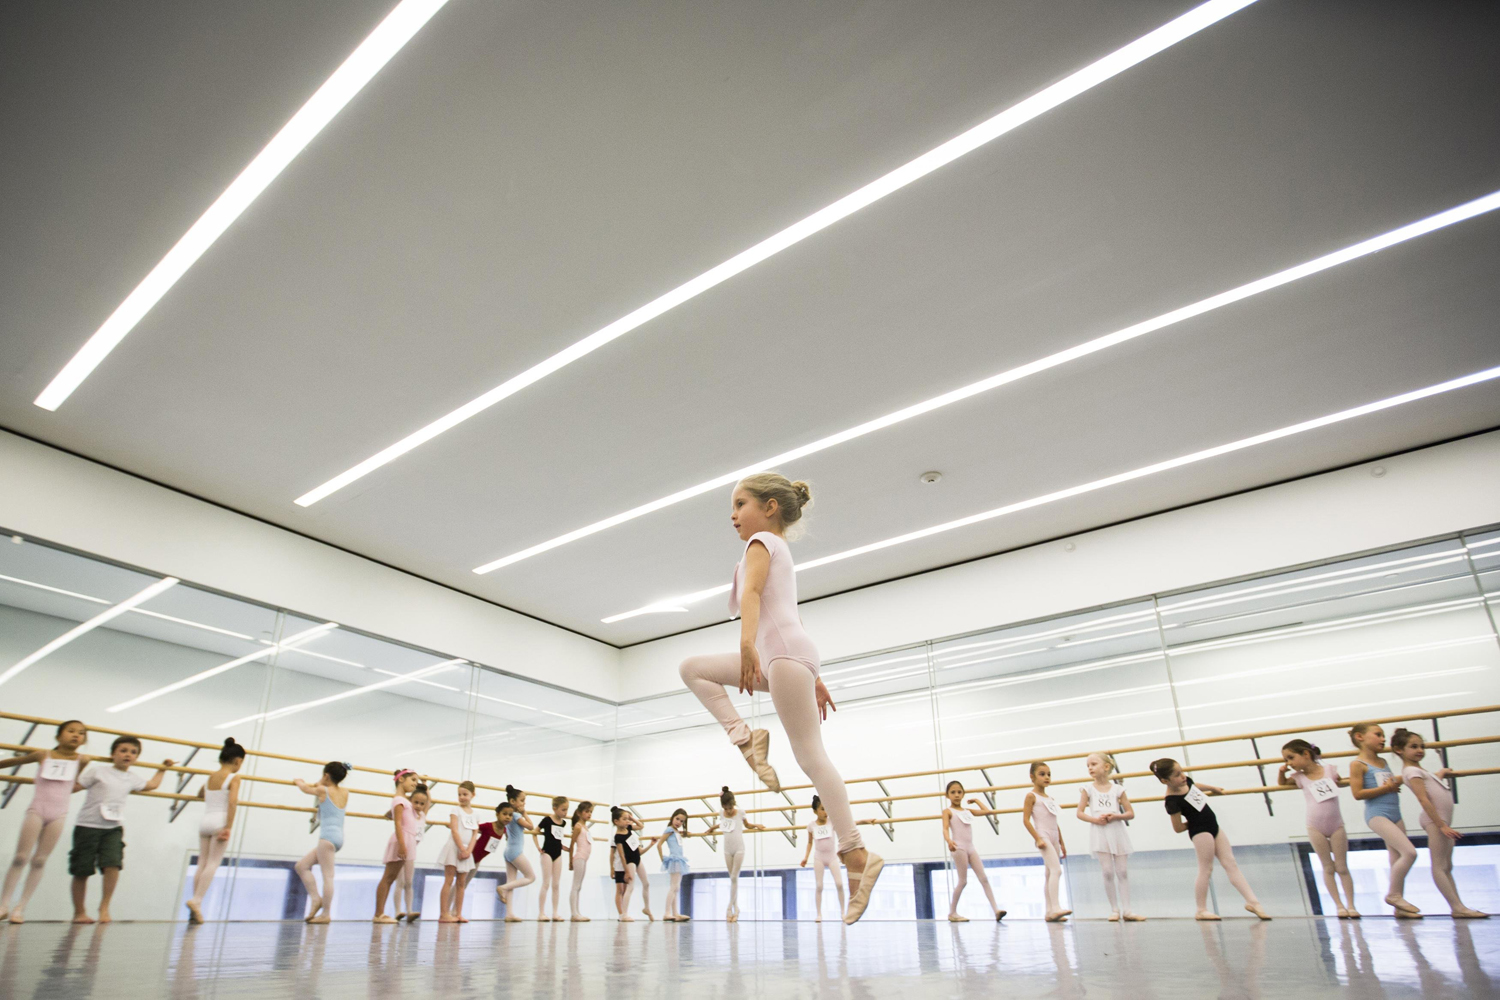 Children watch as a girl dances during an audition for the School of American Ballet in New York